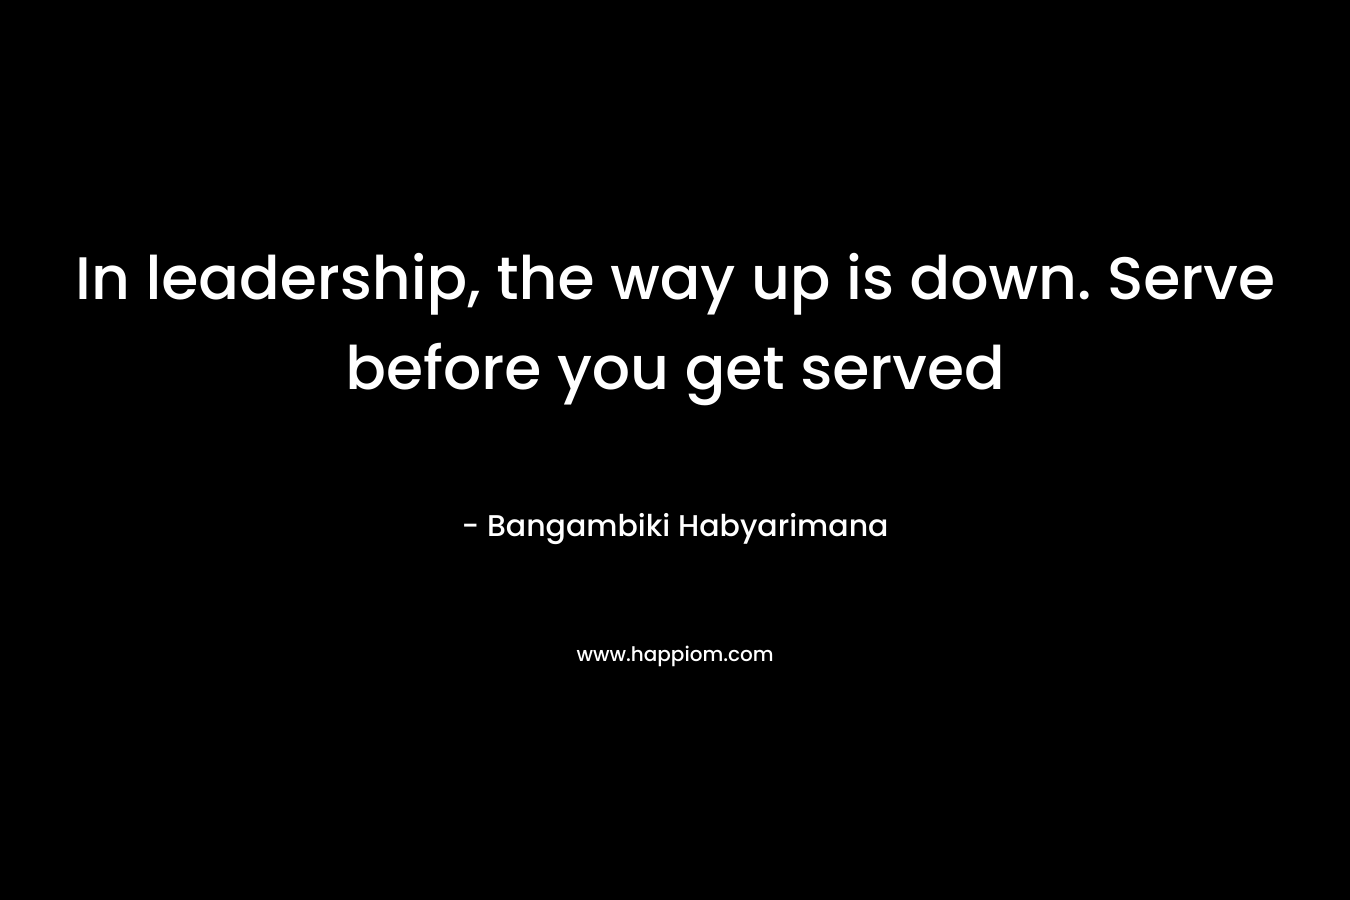 In leadership, the way up is down. Serve before you get served